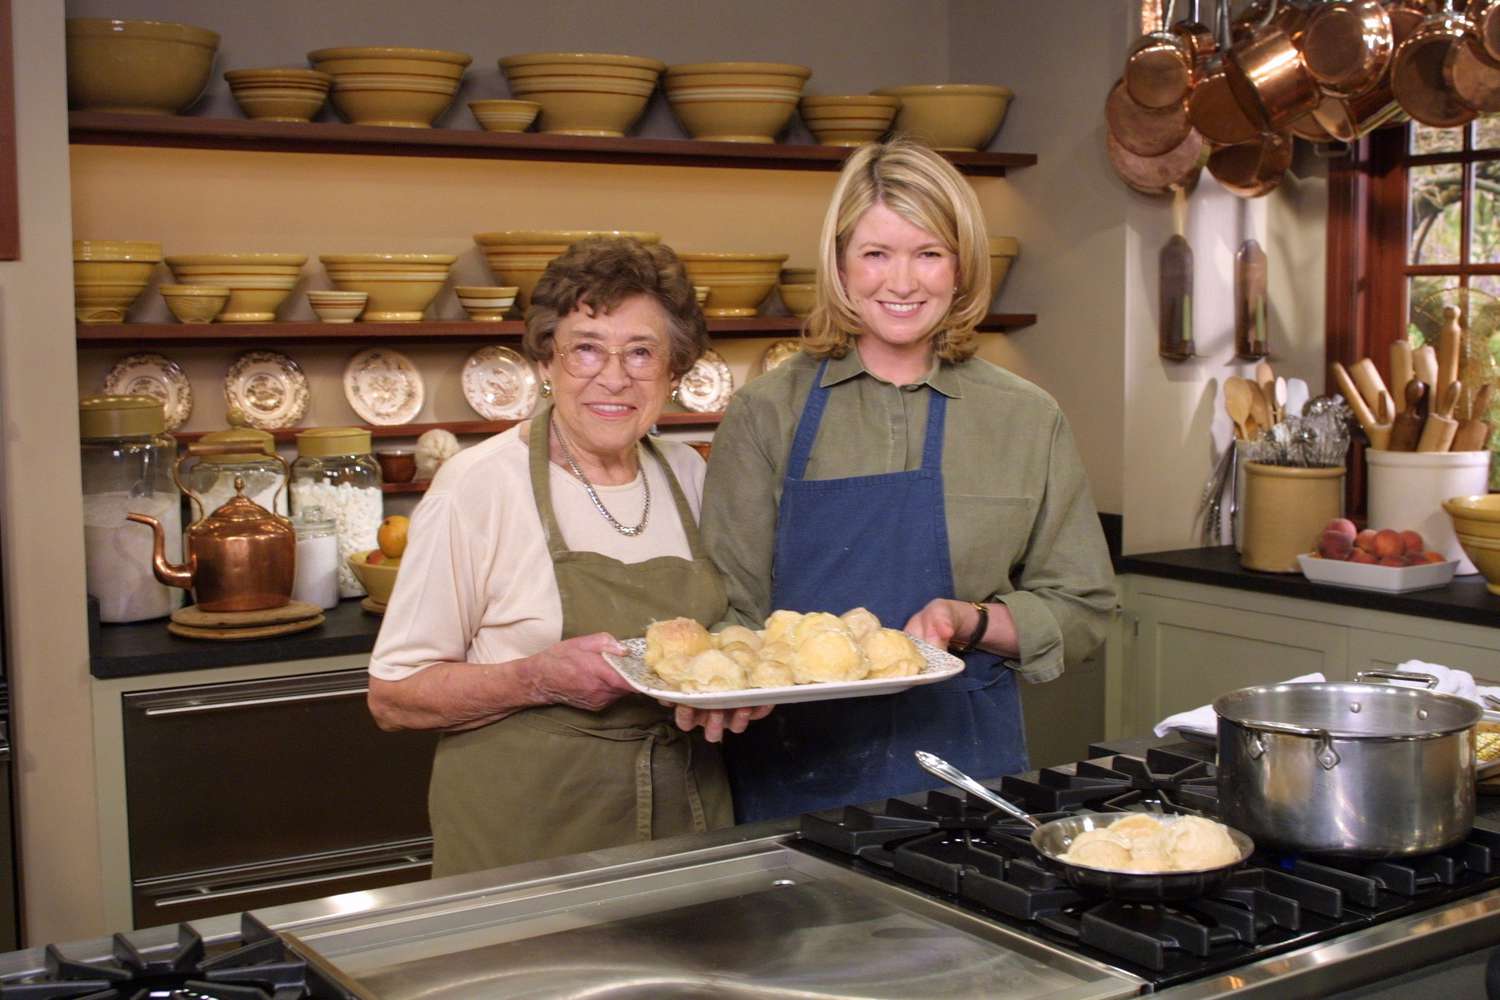 martha stewart and another woman holding baked goods in kitchen